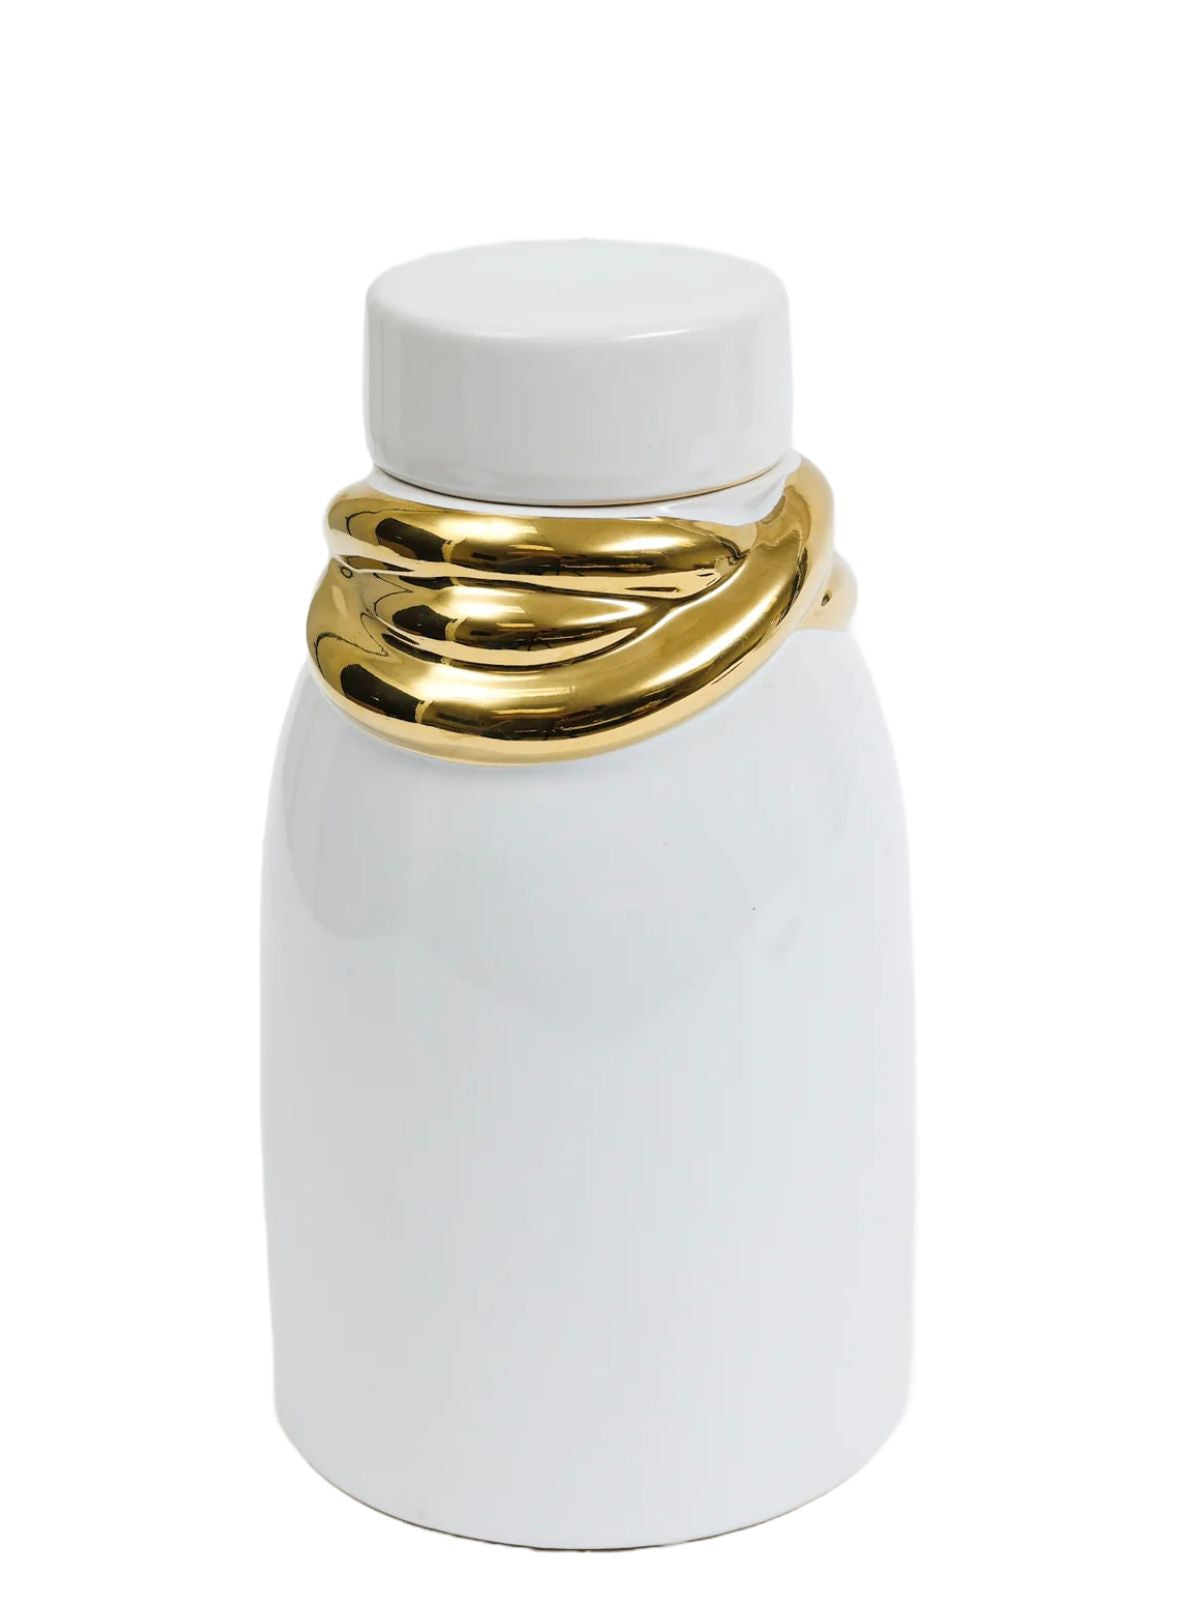 White Glossy Ceramic Lidded Jar with Stunning Gold Details, 6W x 10.5H.